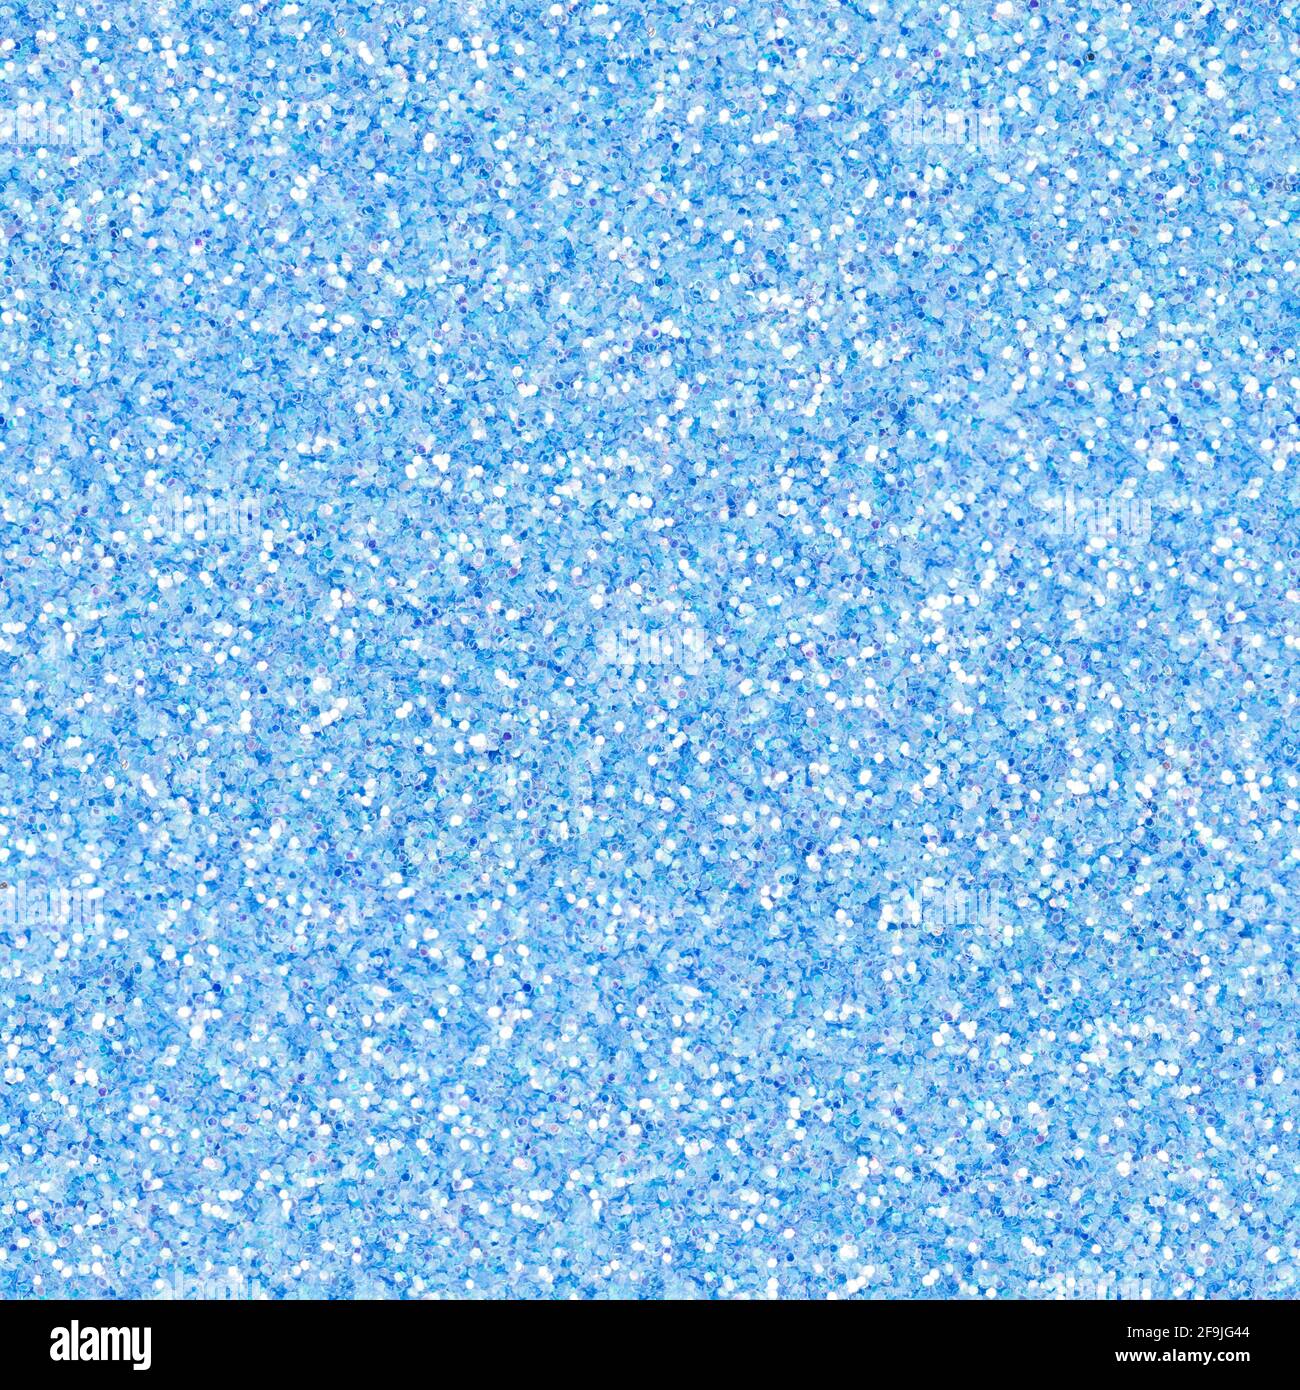 Bright light blue glitter, sparkle confetti texture. Christmas abstract background, seamless pattern. Stock Photo